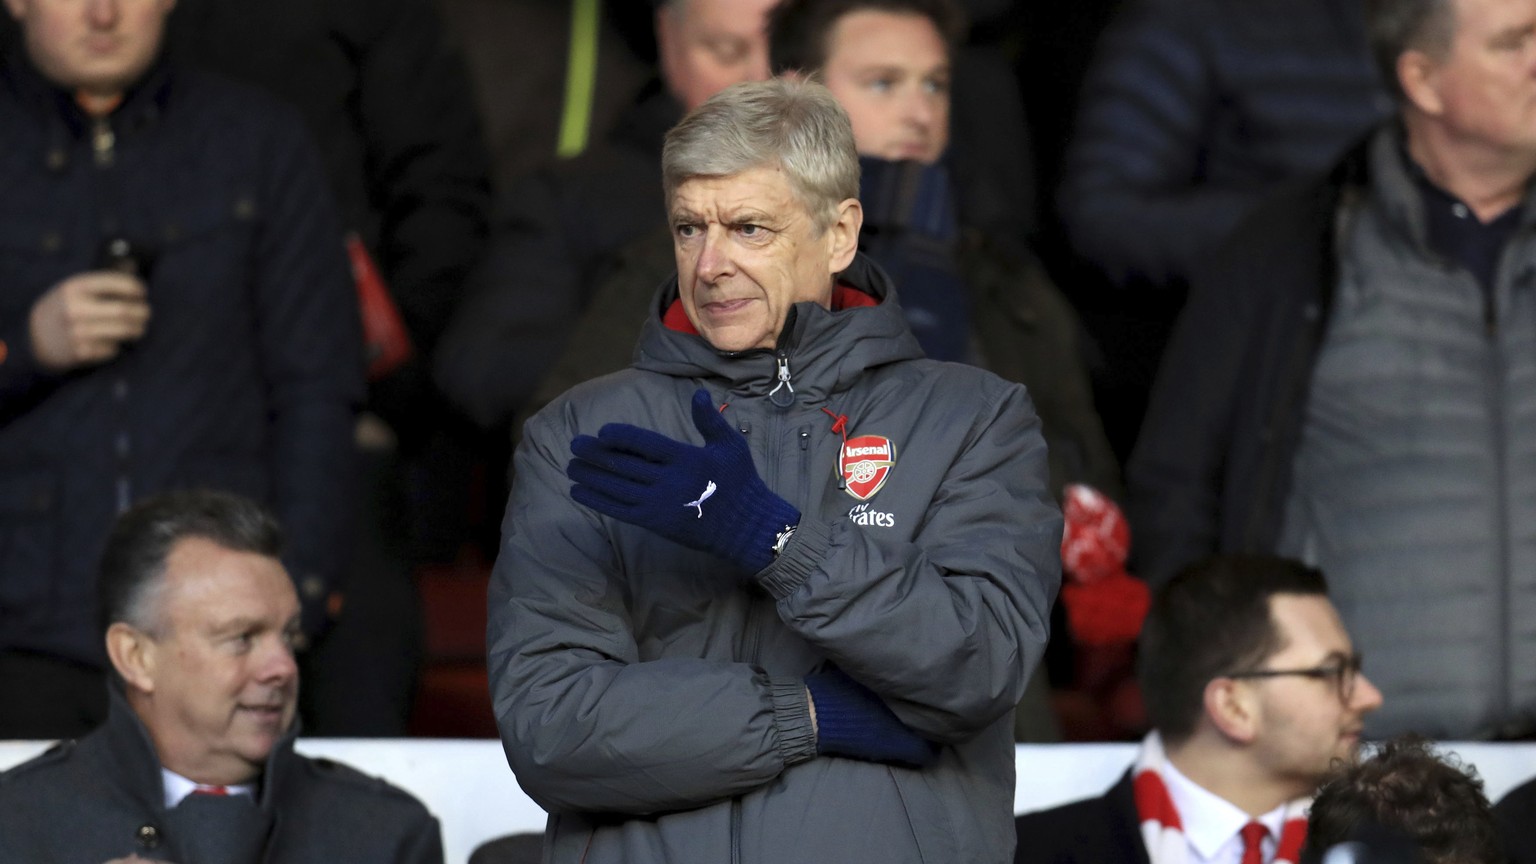 Arsenal manager Arsene Wenger gestures from the stands during the English FA Cup, Third Round soccer match between Nottingham Forest and Arsenal at the City Ground, Nottingham, England, Sunday, Jan. 7 ...